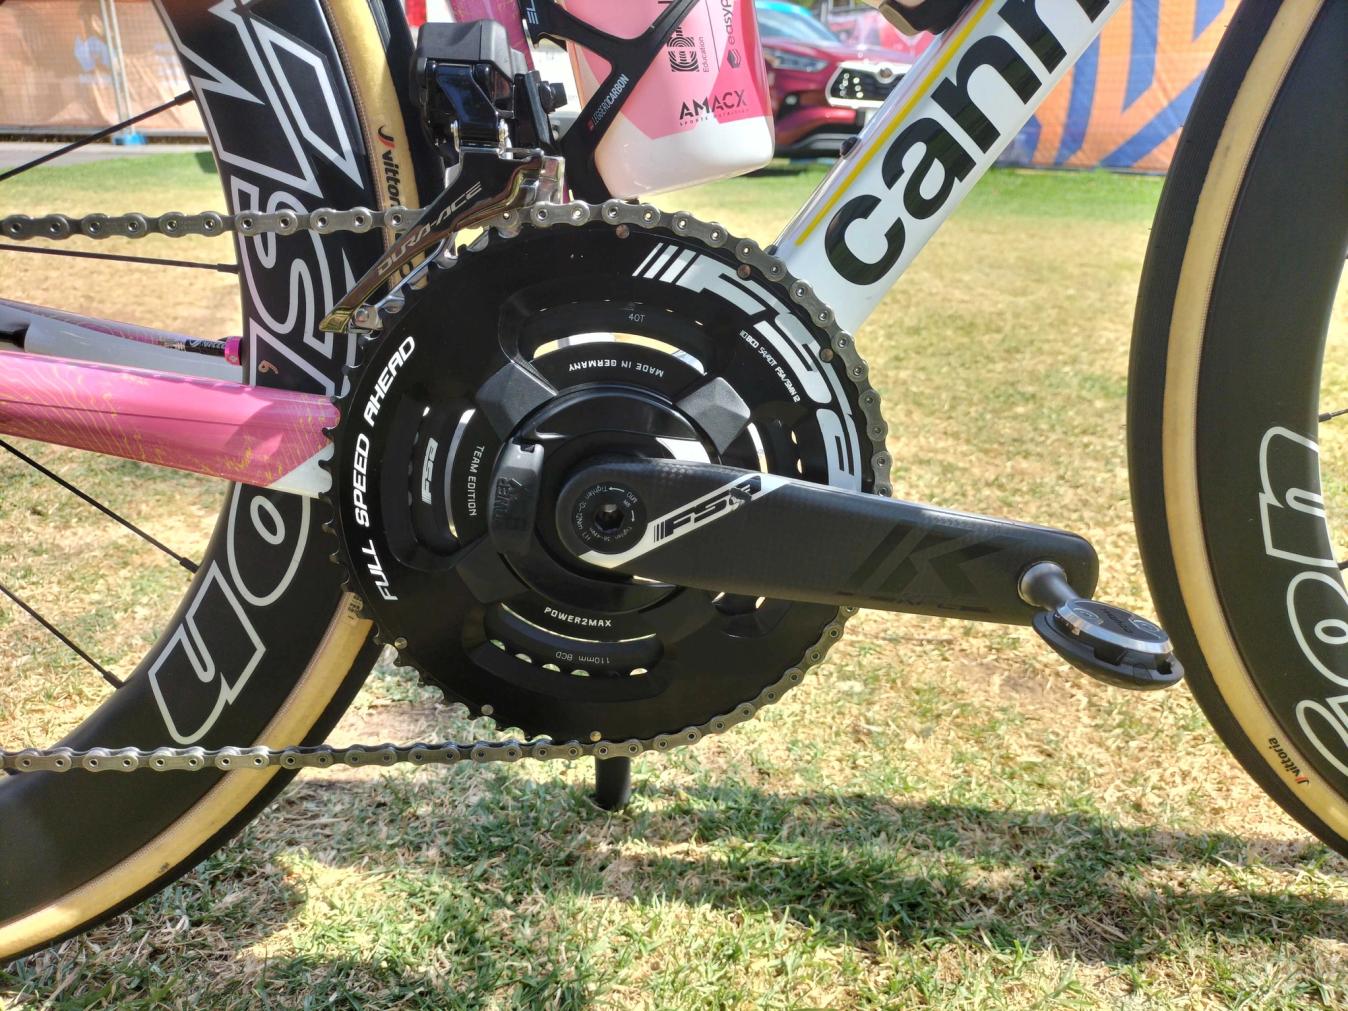 A Shimano Dura-Ace groupset was paired with a FSA Powerbox crankset